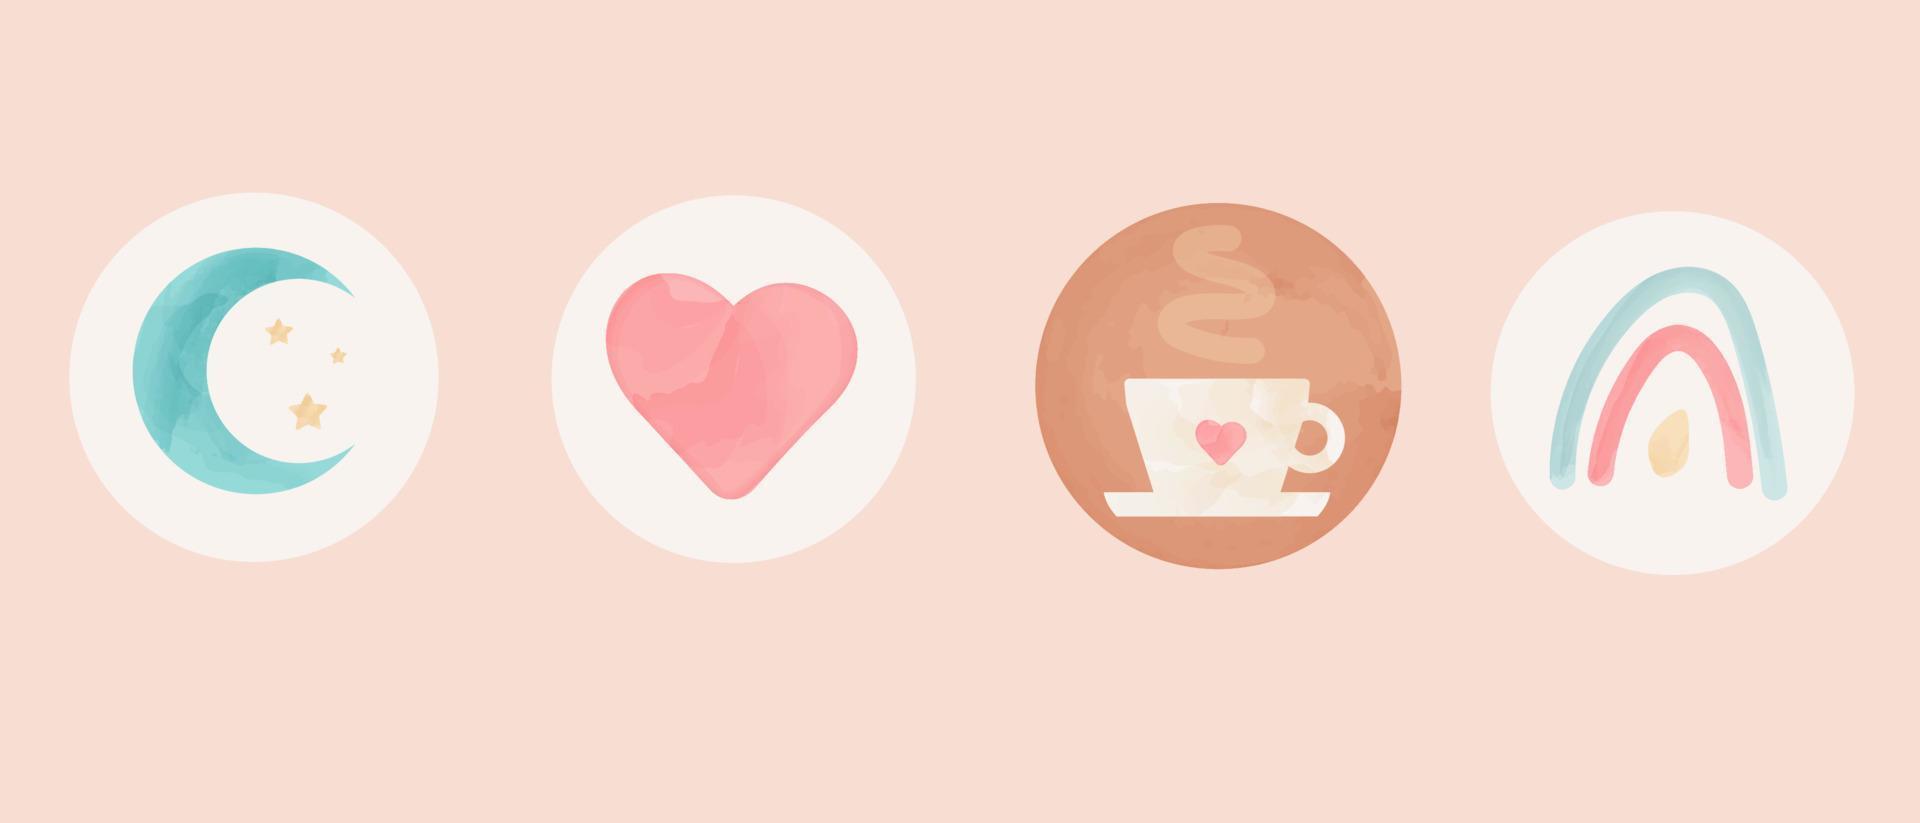 Watercolor illustration icons coffee, moon, rainbow, heart. can be used for Instagram vector